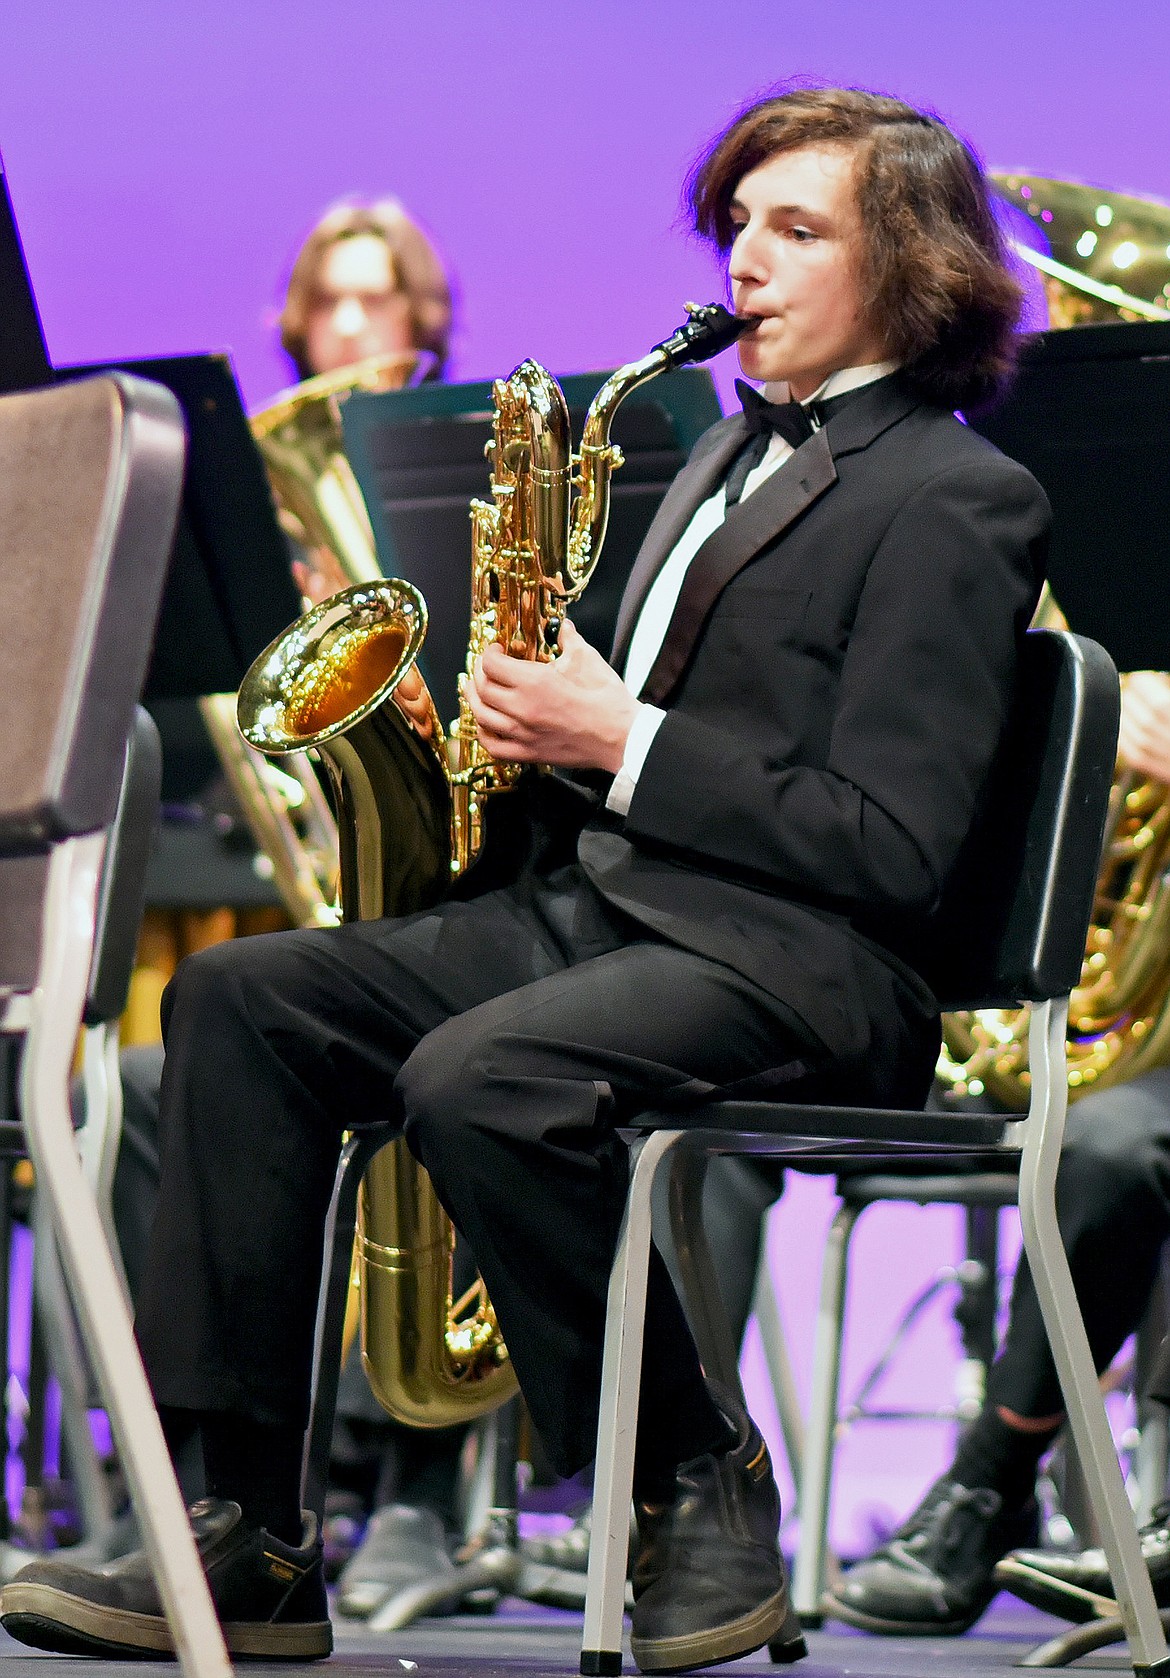 Whitefish High School student Michael Wymer plays the baritone saxophone during the Fall Band Concert on Oct. 28 at the Performing Arts Center in Whitefish. (Whitney England/Whitefish Pilot)